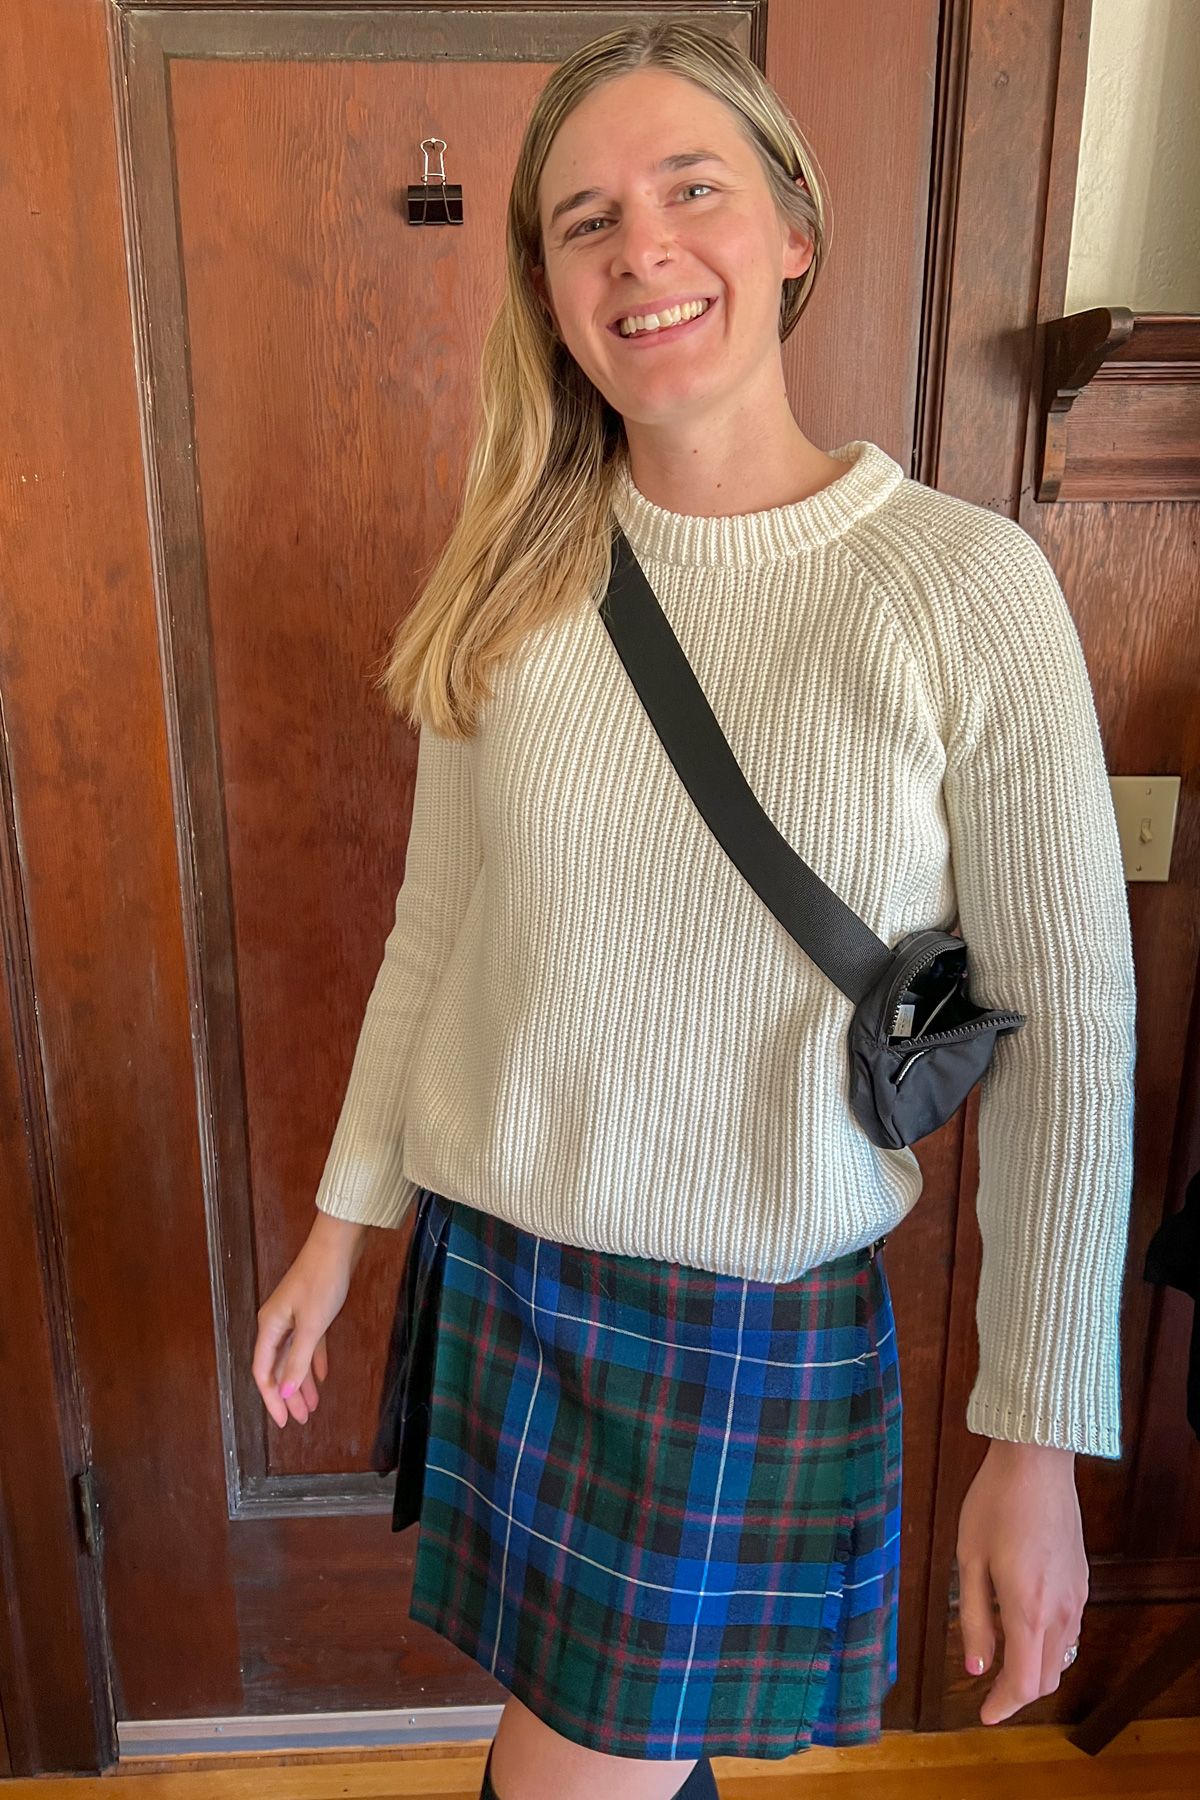 A young woman wearing a white sweater and a blue plaid skirt stands smiles at the camera in front of a hardwood interior.